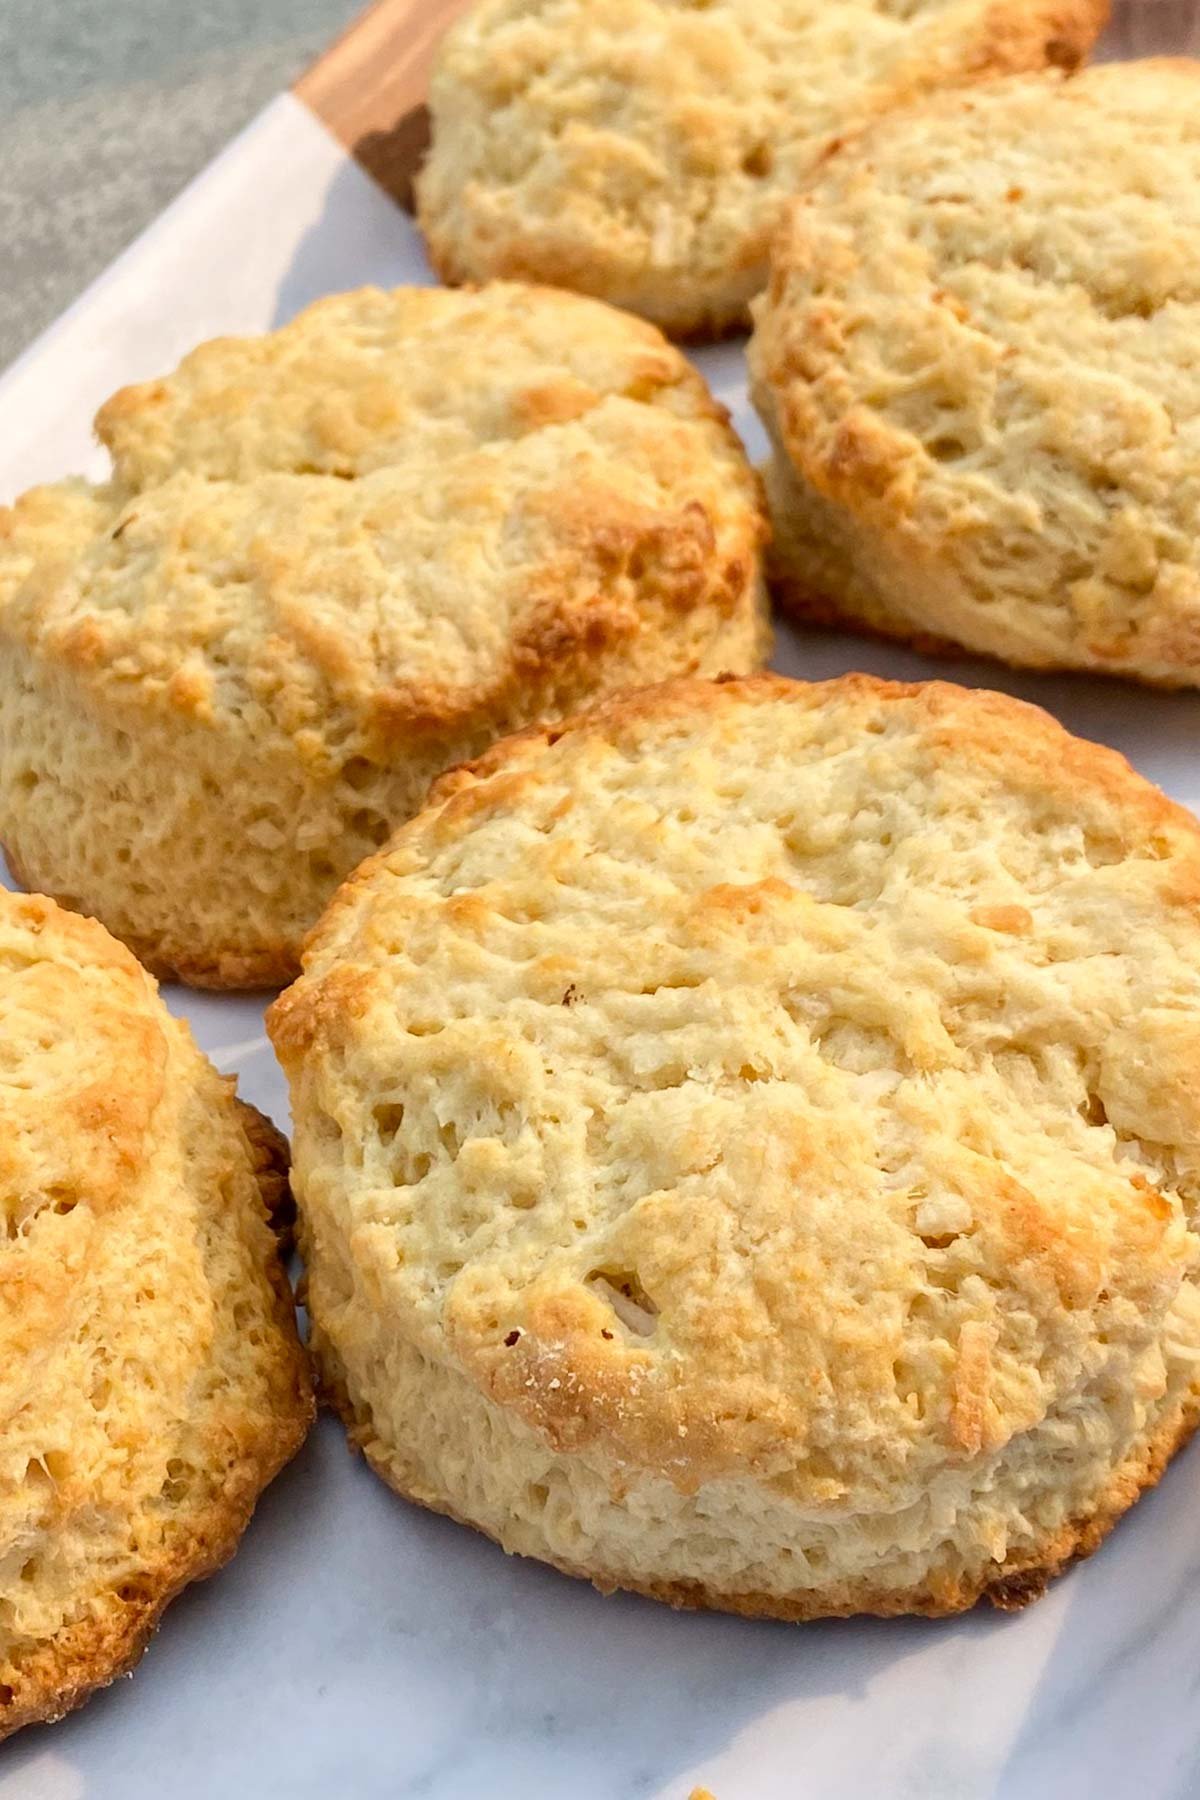 Freshly baked scones on parchment lined baking pan.